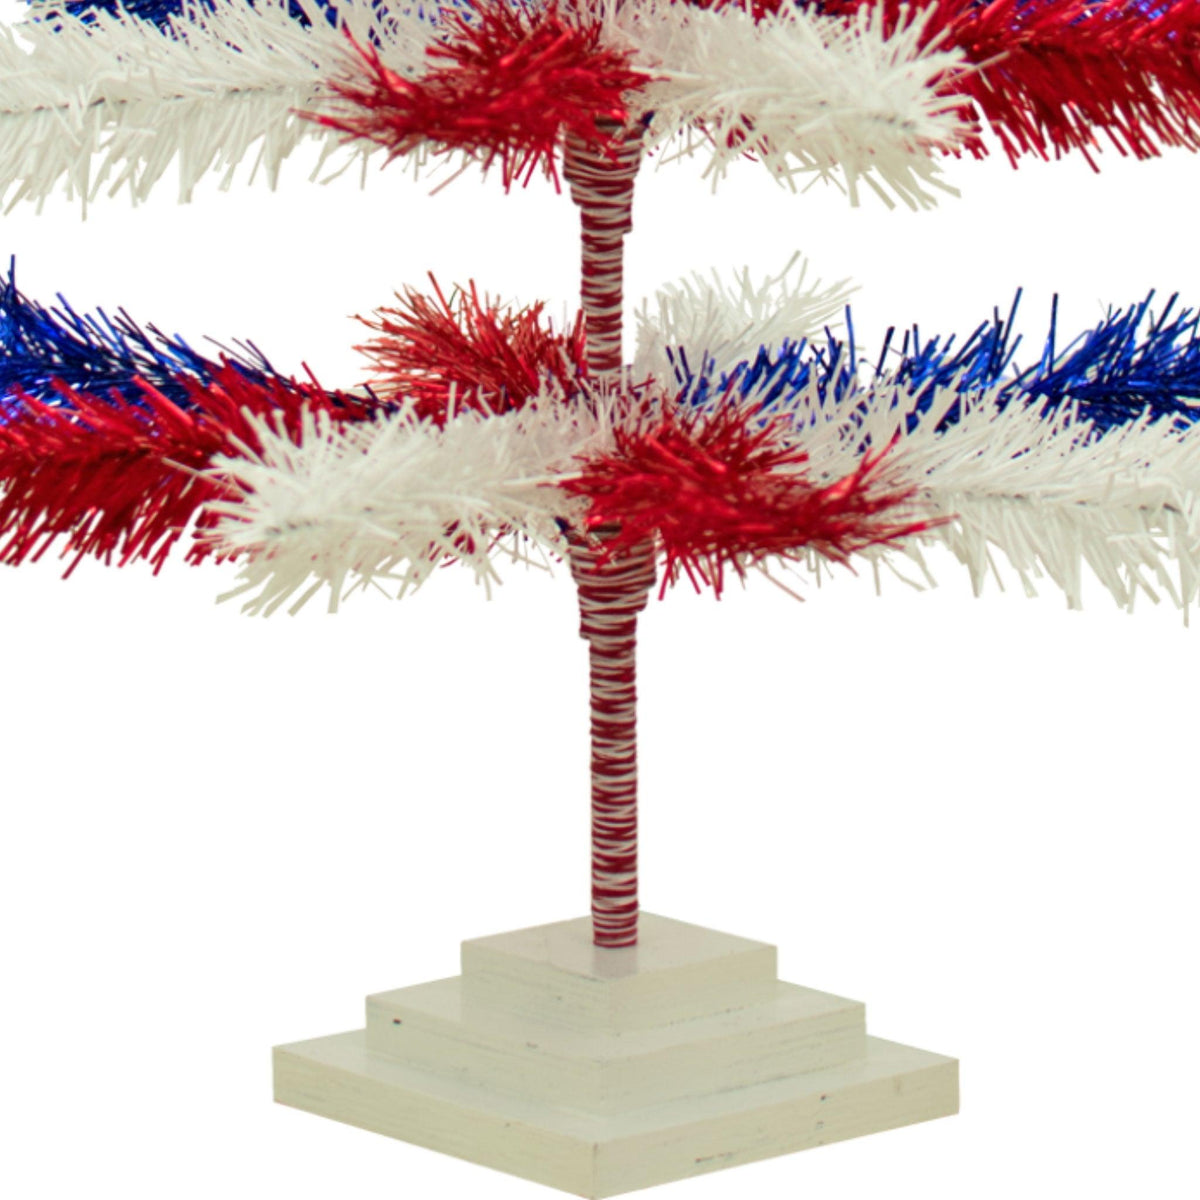 Bottom of the 48in Tall Tree comes with a White Tiered tree base. Red White and Blue Mixed Tinsel Christmas Tree on sale at leedisplay.com.